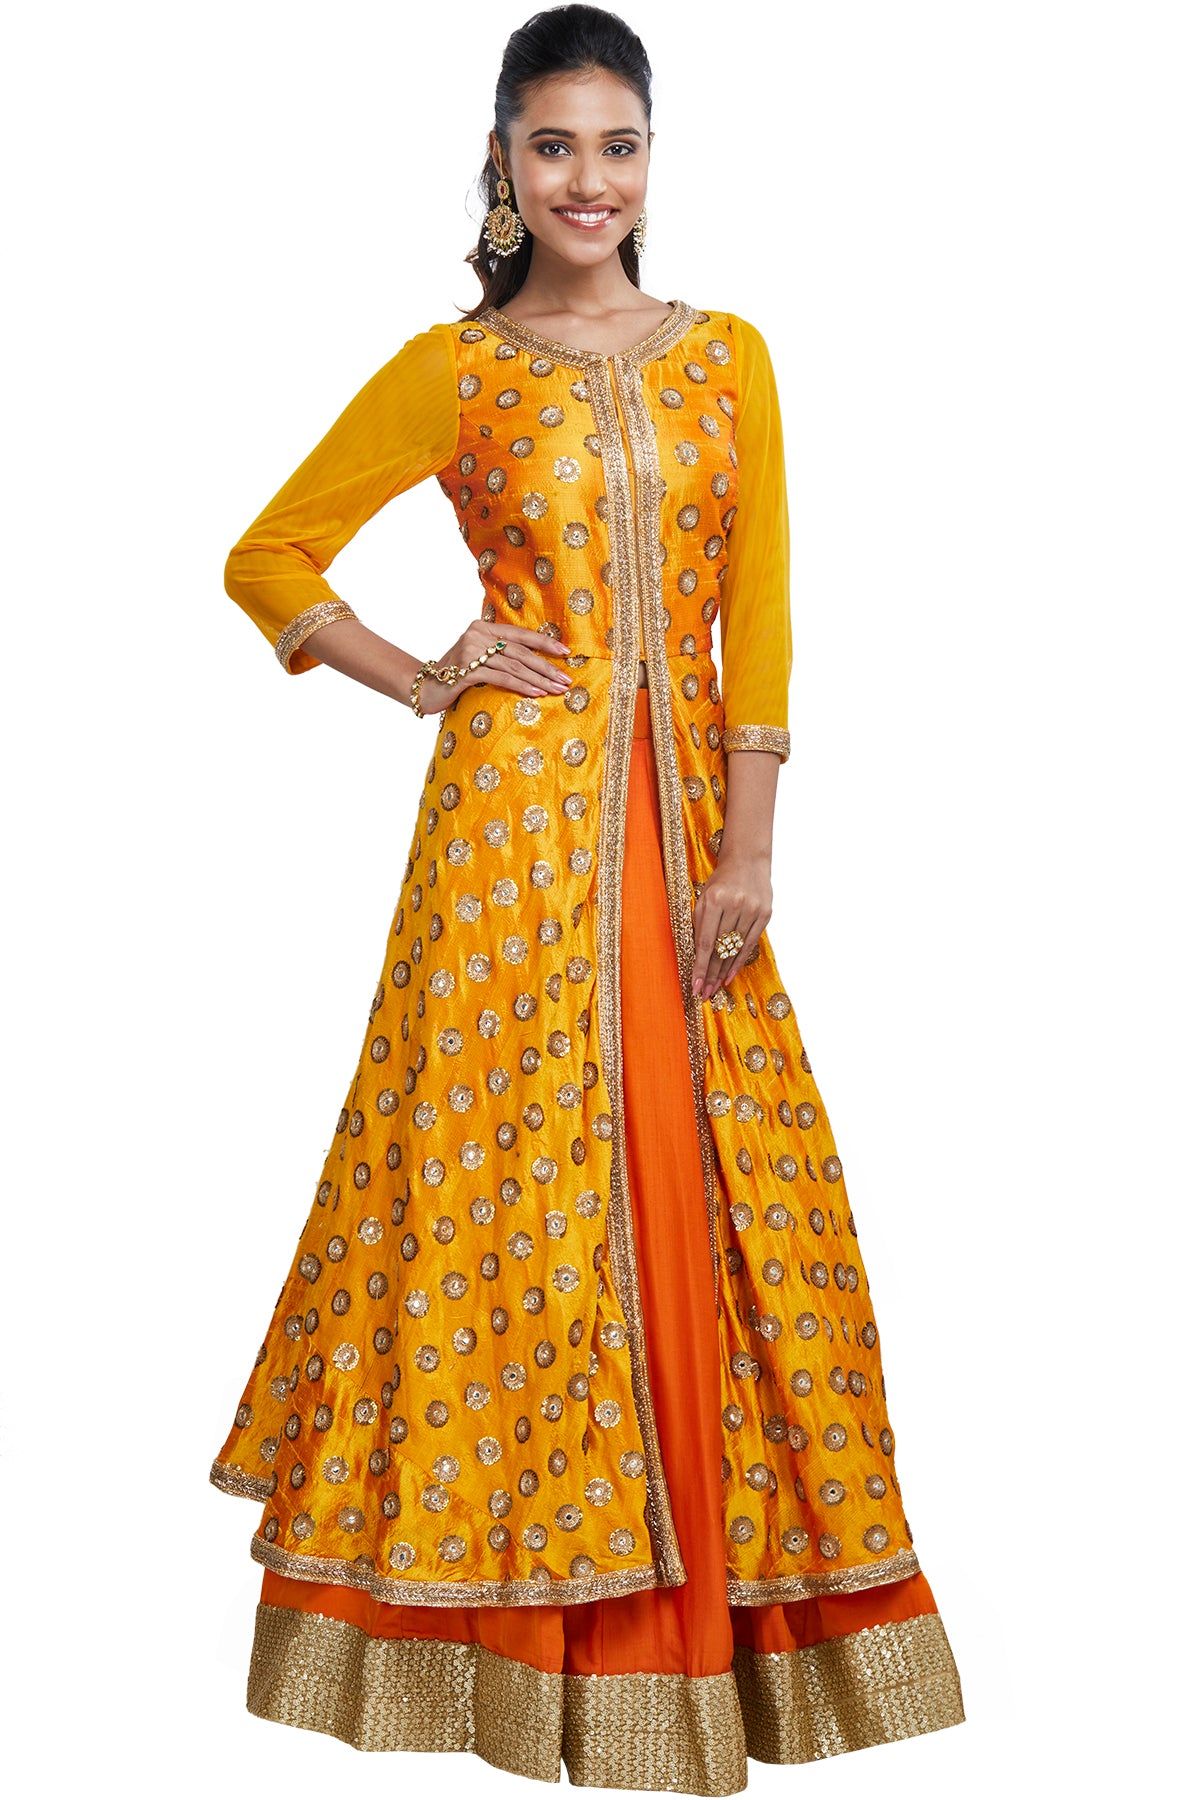 Look lush for life in this stunning combination of an embroidered saffron anarkali front-slit top over an orange skirt with a stark gold border. 